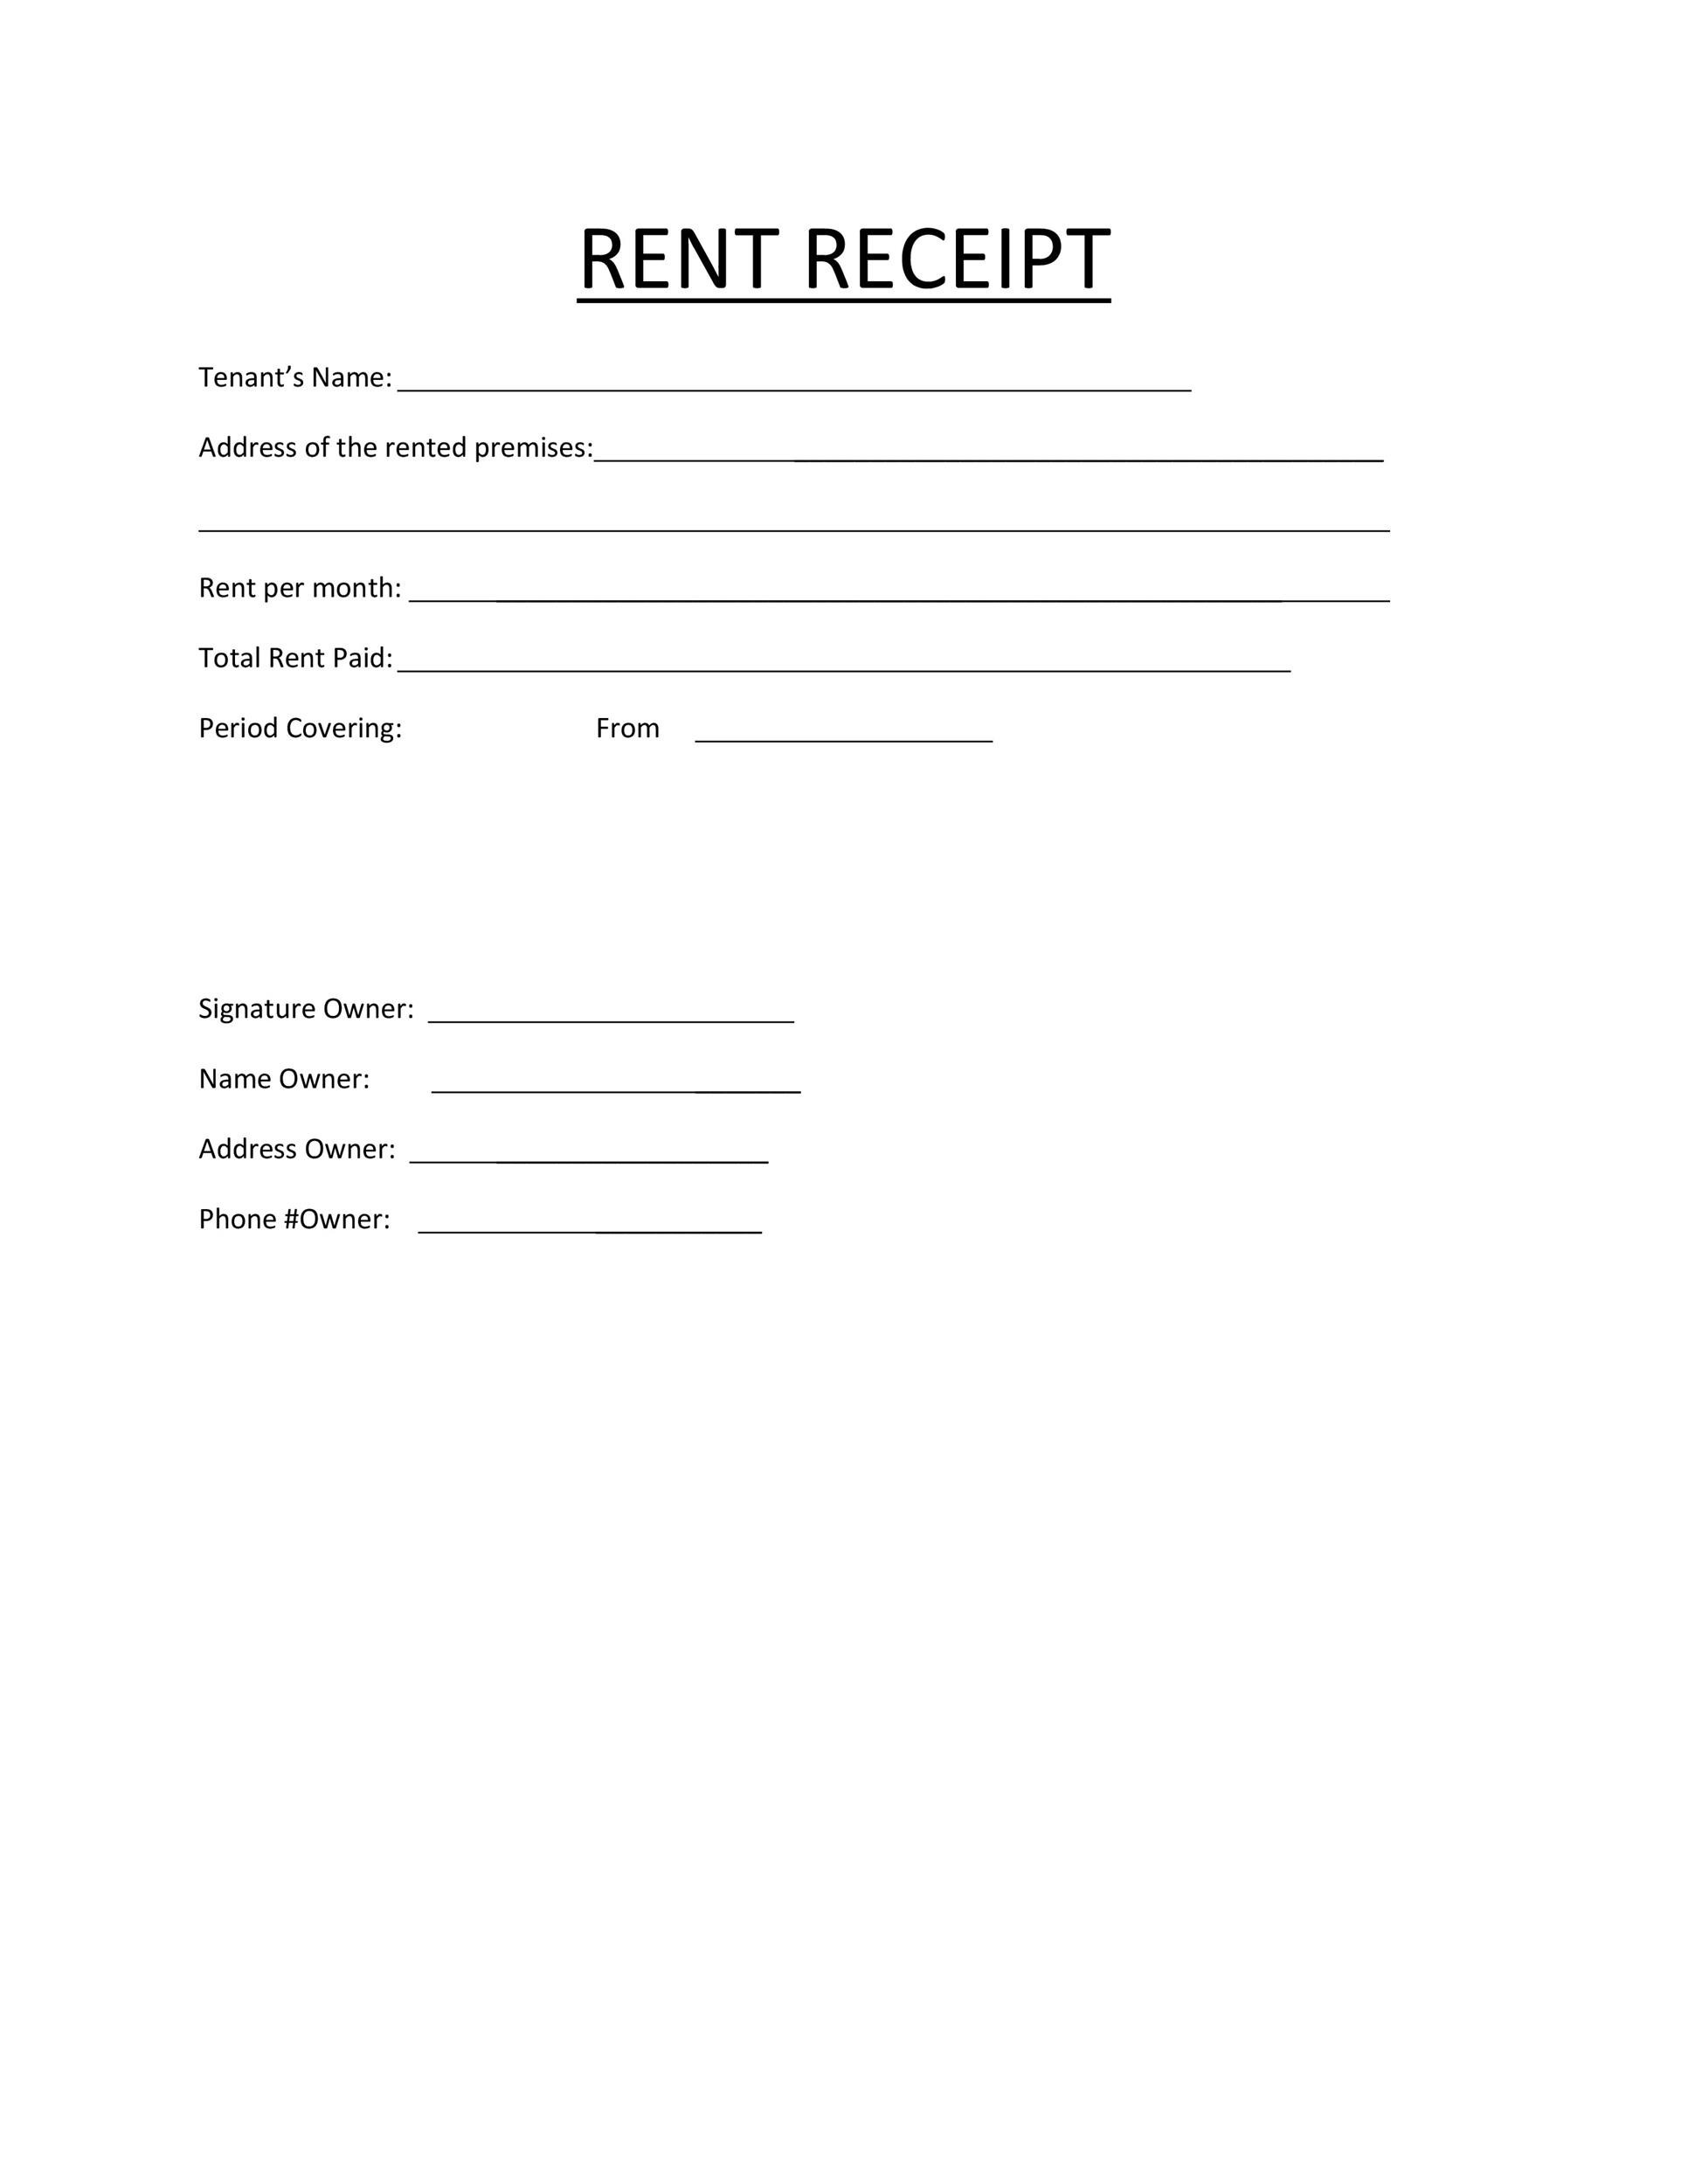 monthly-rent-receipt-templates-great-printable-receipt-templates